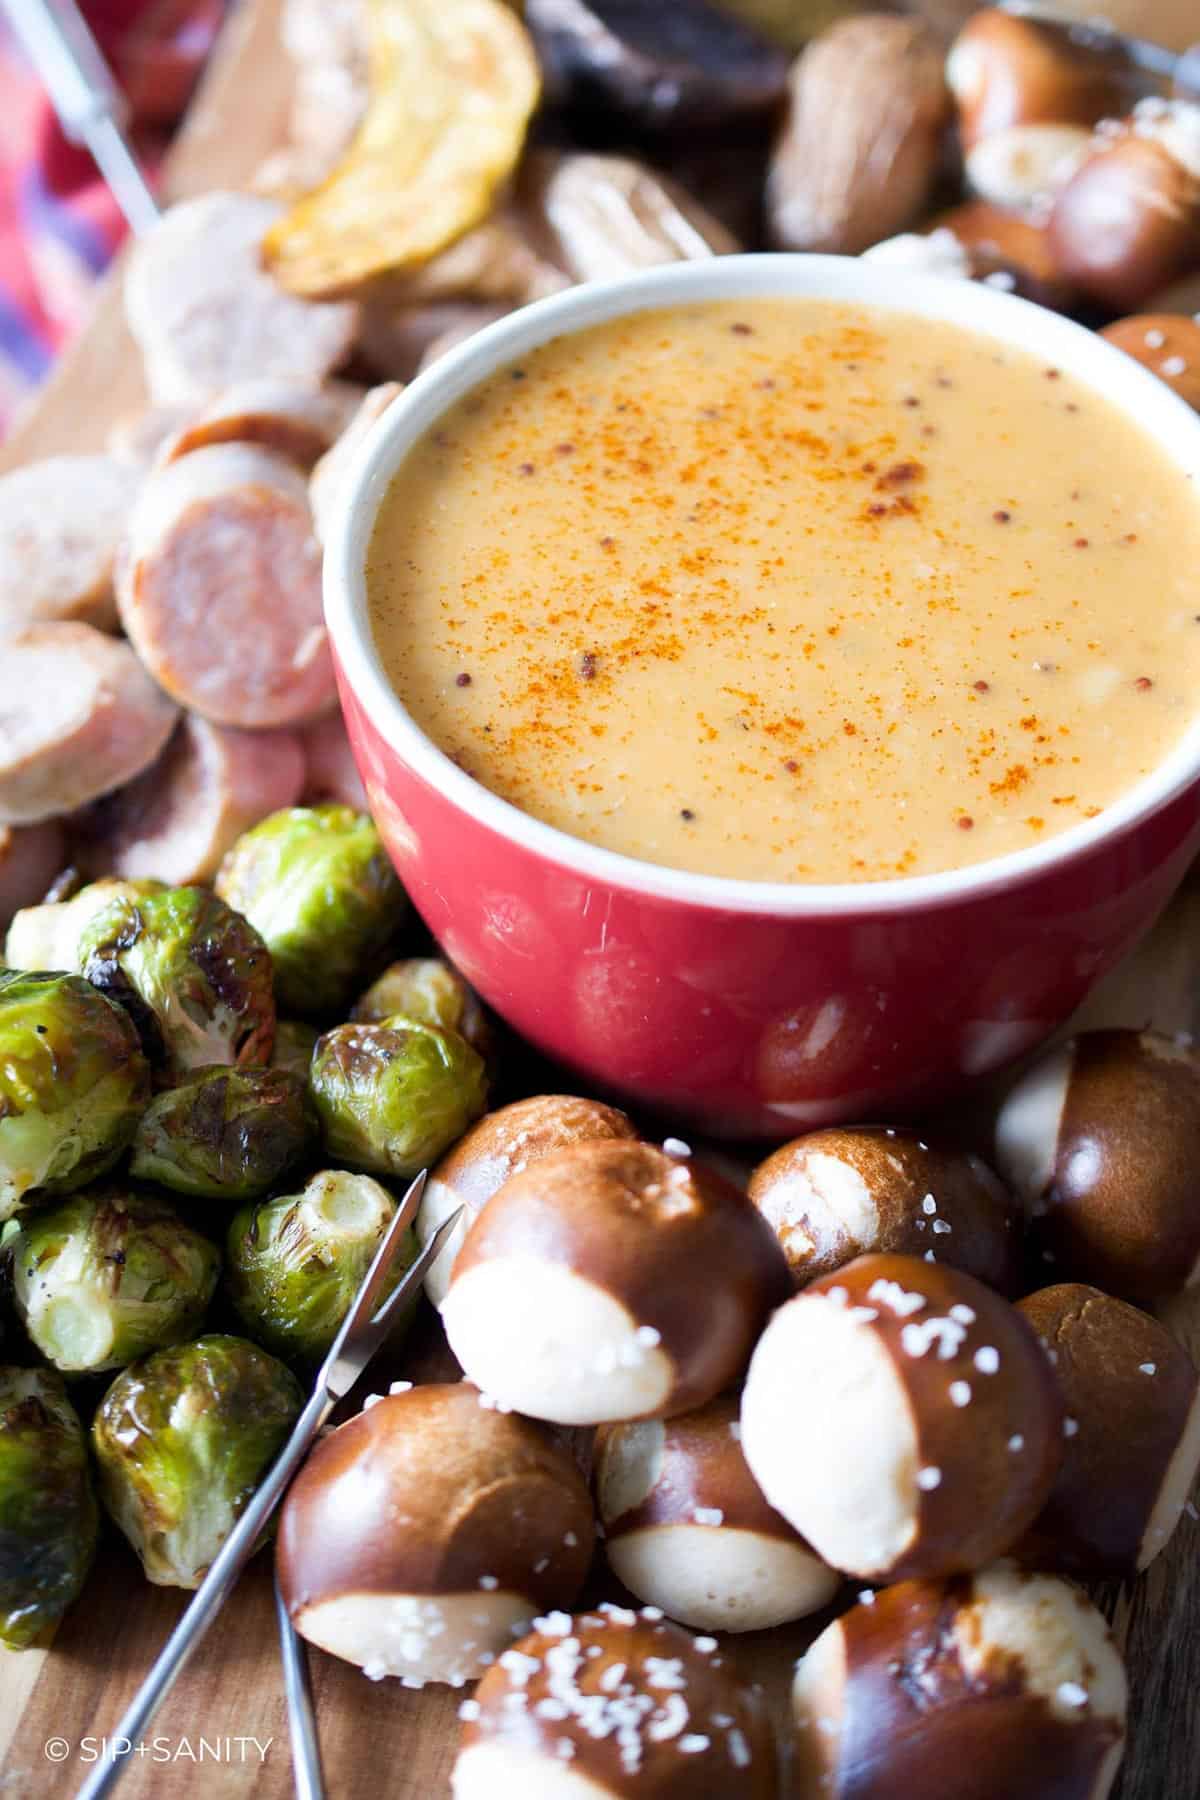 A red dish filled with beer cheese fondue surrounded by pretzels, sausage and brussels sprouts.